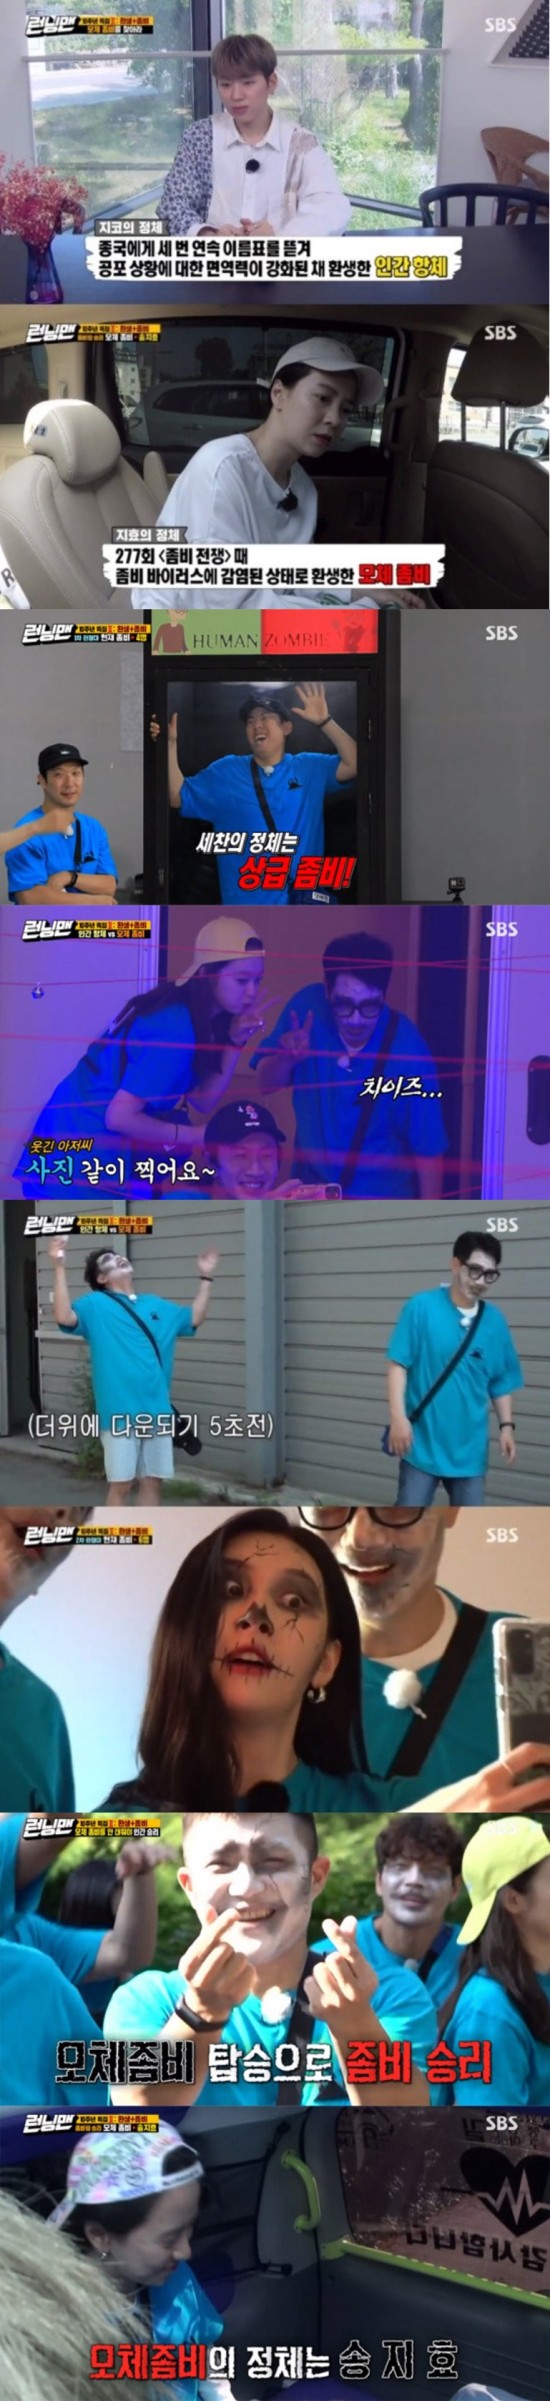 Running Man Song Ji-hyo was revealed as the mother Zombie 2: The Dead are Among Us.SBS Running Man, which aired on the 5th, showed the 2020 Dead Again special, the second episode of Legend Race, to mark the 10th anniversary of the broadcast, and soared to 7.1% of the highest TV viewer ratings per minute.Race is the 2020 version of Dead Again Race, which was a big topic with the composition and reversal of time and space in the 1930s and 2013 at the time of broadcasting in 2013.Singer Zico, Sunmi, comedian Jo Se-ho, and actor Lee Do-hyun joined as guests and added meaning.The members were divided into Zico team, Sunmi team, Seho team, and Dohyeon team, and they played against Zombie 2: The Dead are Among Us.In particular, Zombie 2: The Dead are Among Us had to be divided into the top-level Zombie 2: The Dead are Among Us and the bottom-level Zombie 2: The Dead are Among Us, and then found a decision ticket to set up the top-level Zombie 2: The Dead are Among Us on the judging panel.With comedian Ji Seok-jin being attacked by Zombie 2: The Dead are Among Us and becoming a junior Zombie 2: The Dead are Among Us, Yang Se-chan, who was on the judging board for the first time, failed to find a vaccine and became a senior Zombie 2: The Dead are Among Us.Since then, the members have become senior, junior Zombie 2: The Dead are Among Us, narrowing the position of humans.Among them, Yoo Jae-Suk survived and found the Infection room by chance, and he got into the emergency car with Zico, who revealed that he was a human antibody, and Song Ji-hyo, who ate the vaccine.But it turns out that Song Ji-hyo is the mother of Zombie 2: The Dead are Among Us, and humans are defeated.The scene took the best minute with top TV viewer ratings of 7.1% per minute.Running Man, which will be broadcast on the 12th, will be featured as a special live broadcast for the 10th anniversary with viewers.Photo: SBS broadcast screen